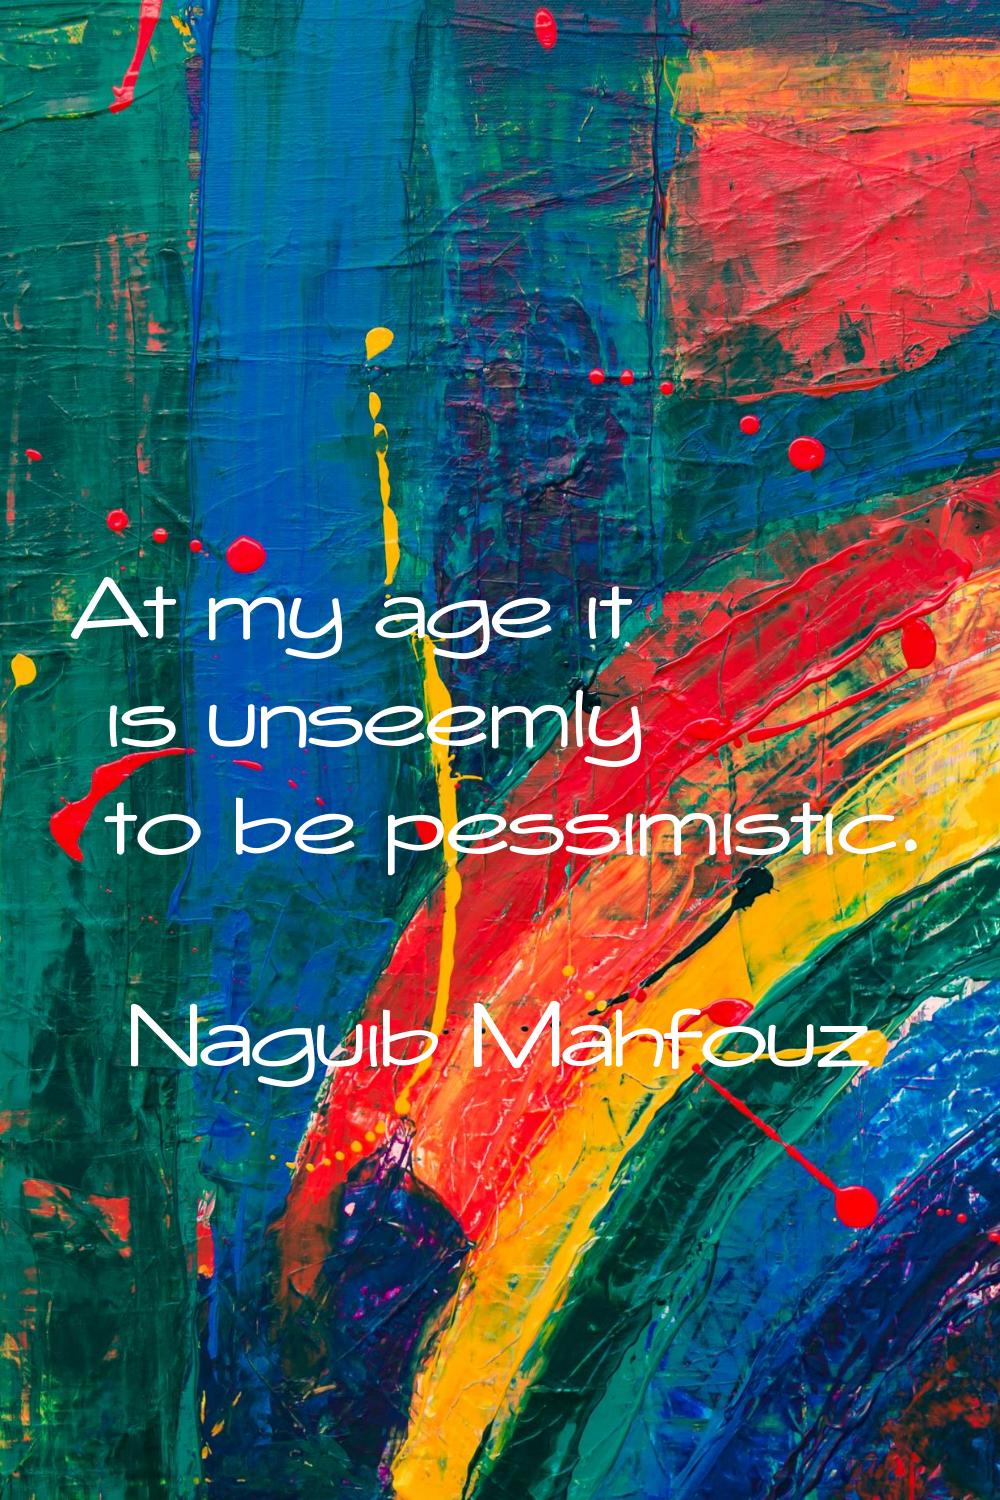 At my age it is unseemly to be pessimistic.